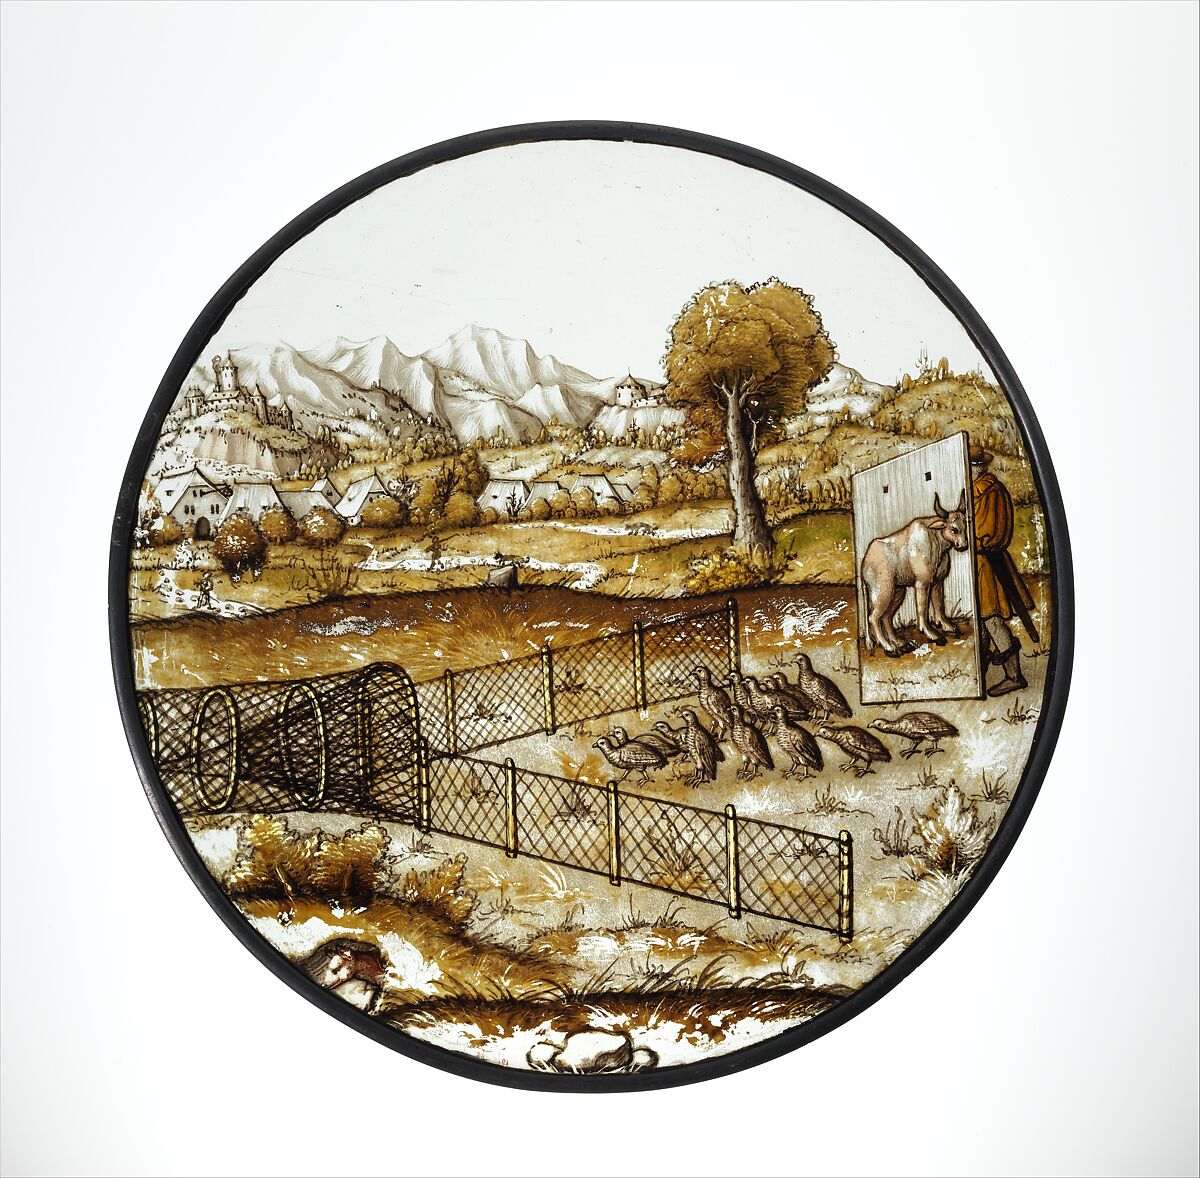 Roundel with Netting Quail, After a design by Augustin Hirschvogel (German, Nuremberg 1503–1553 Vienna), Colorless glass, vitreous paint, silver stain and cold enamel, German 